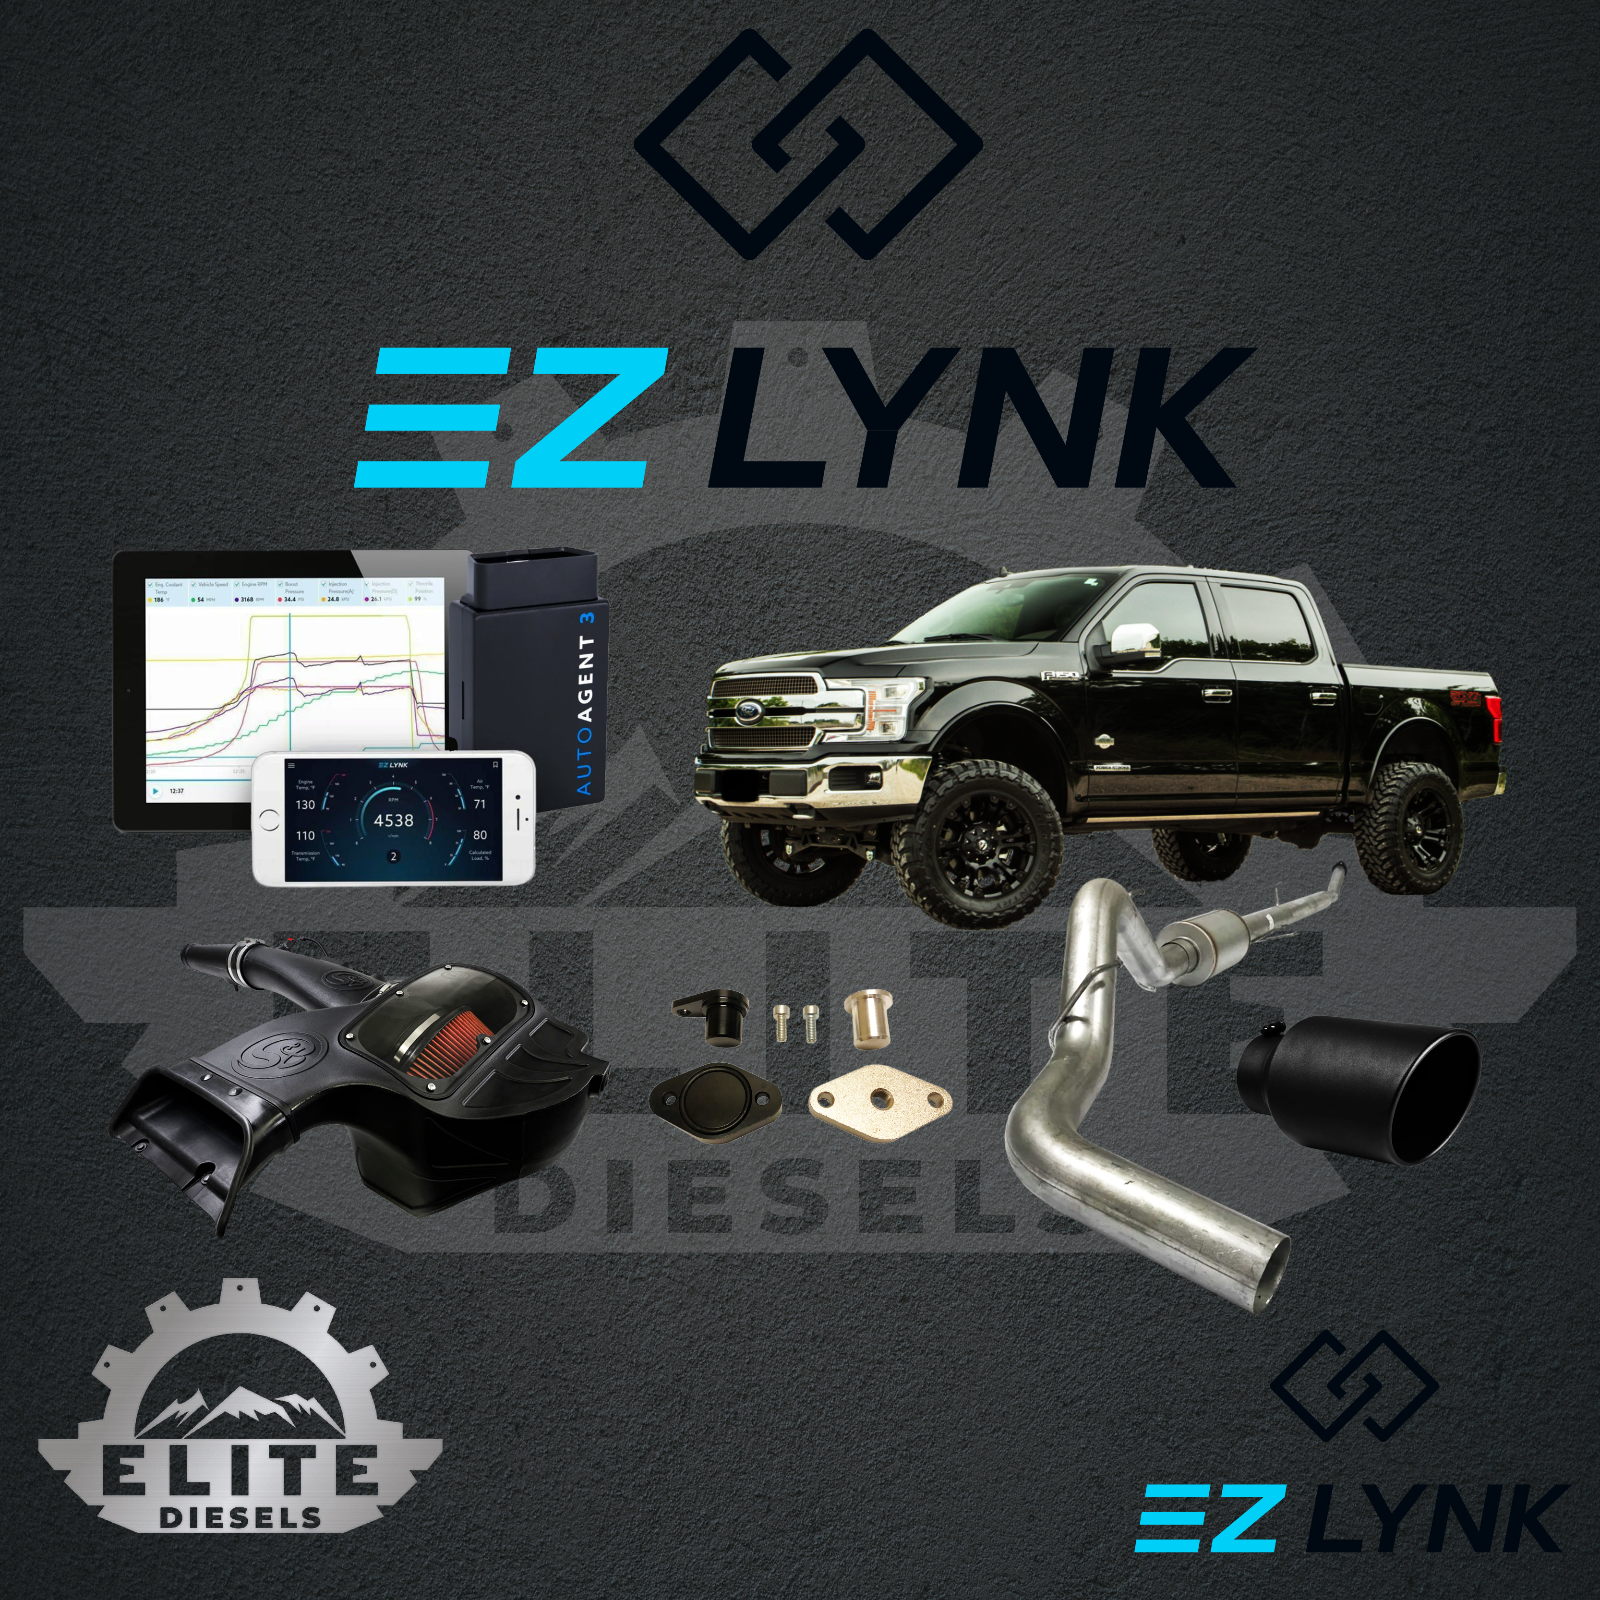 2018 - 2019 3.0L FORD POWERSTROKE  EZLYNK 3.0 TUNER ALL-IN-ONE CUSTOMIZABLE KIT.